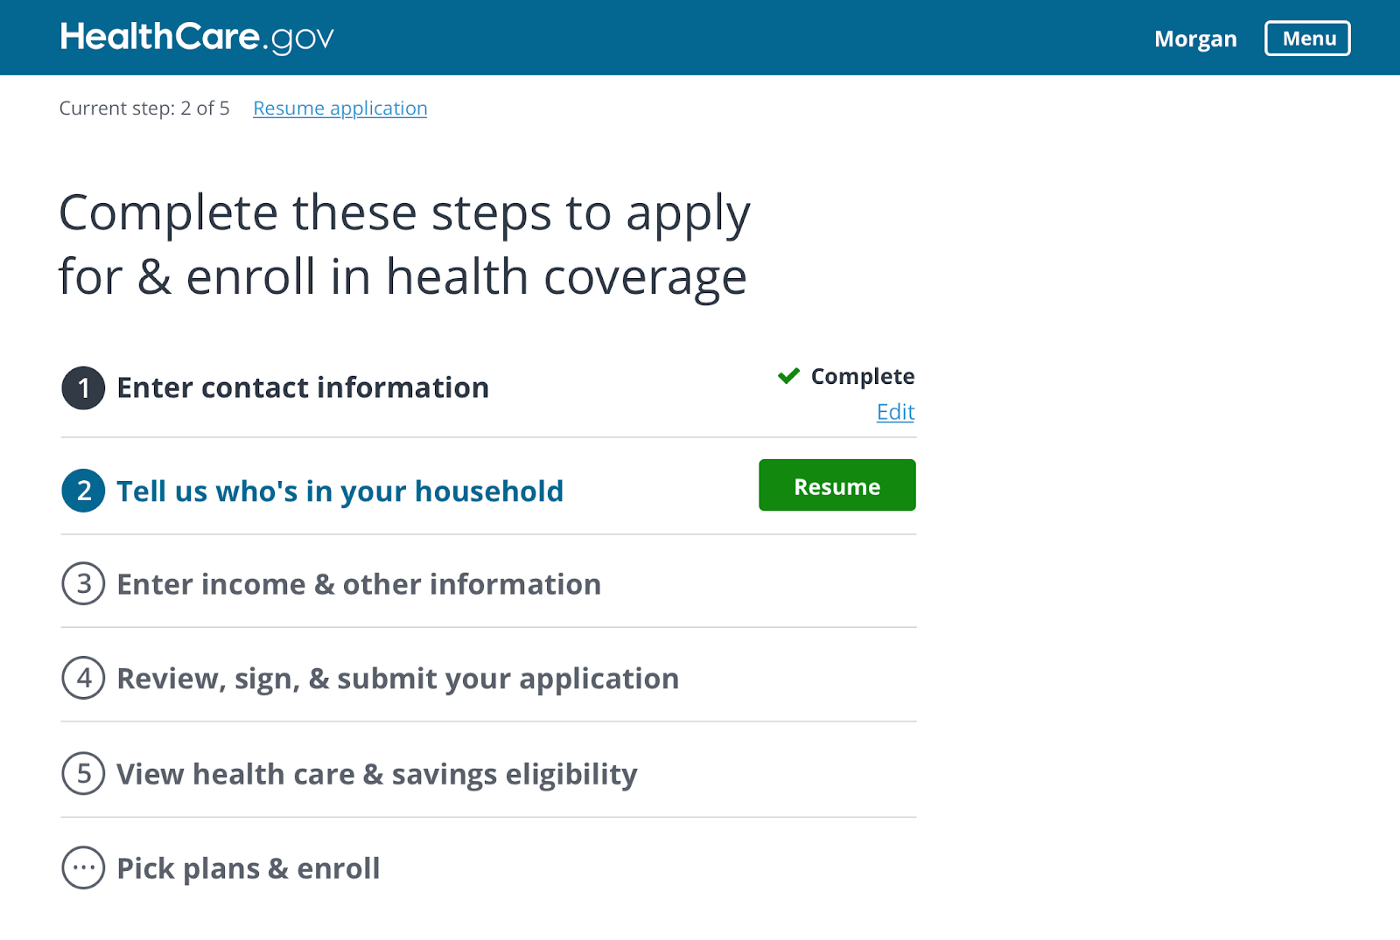 A screenshot of a task list in the HealthCare.gov application, including steps like Enter contact information and Tell us who's in your household.